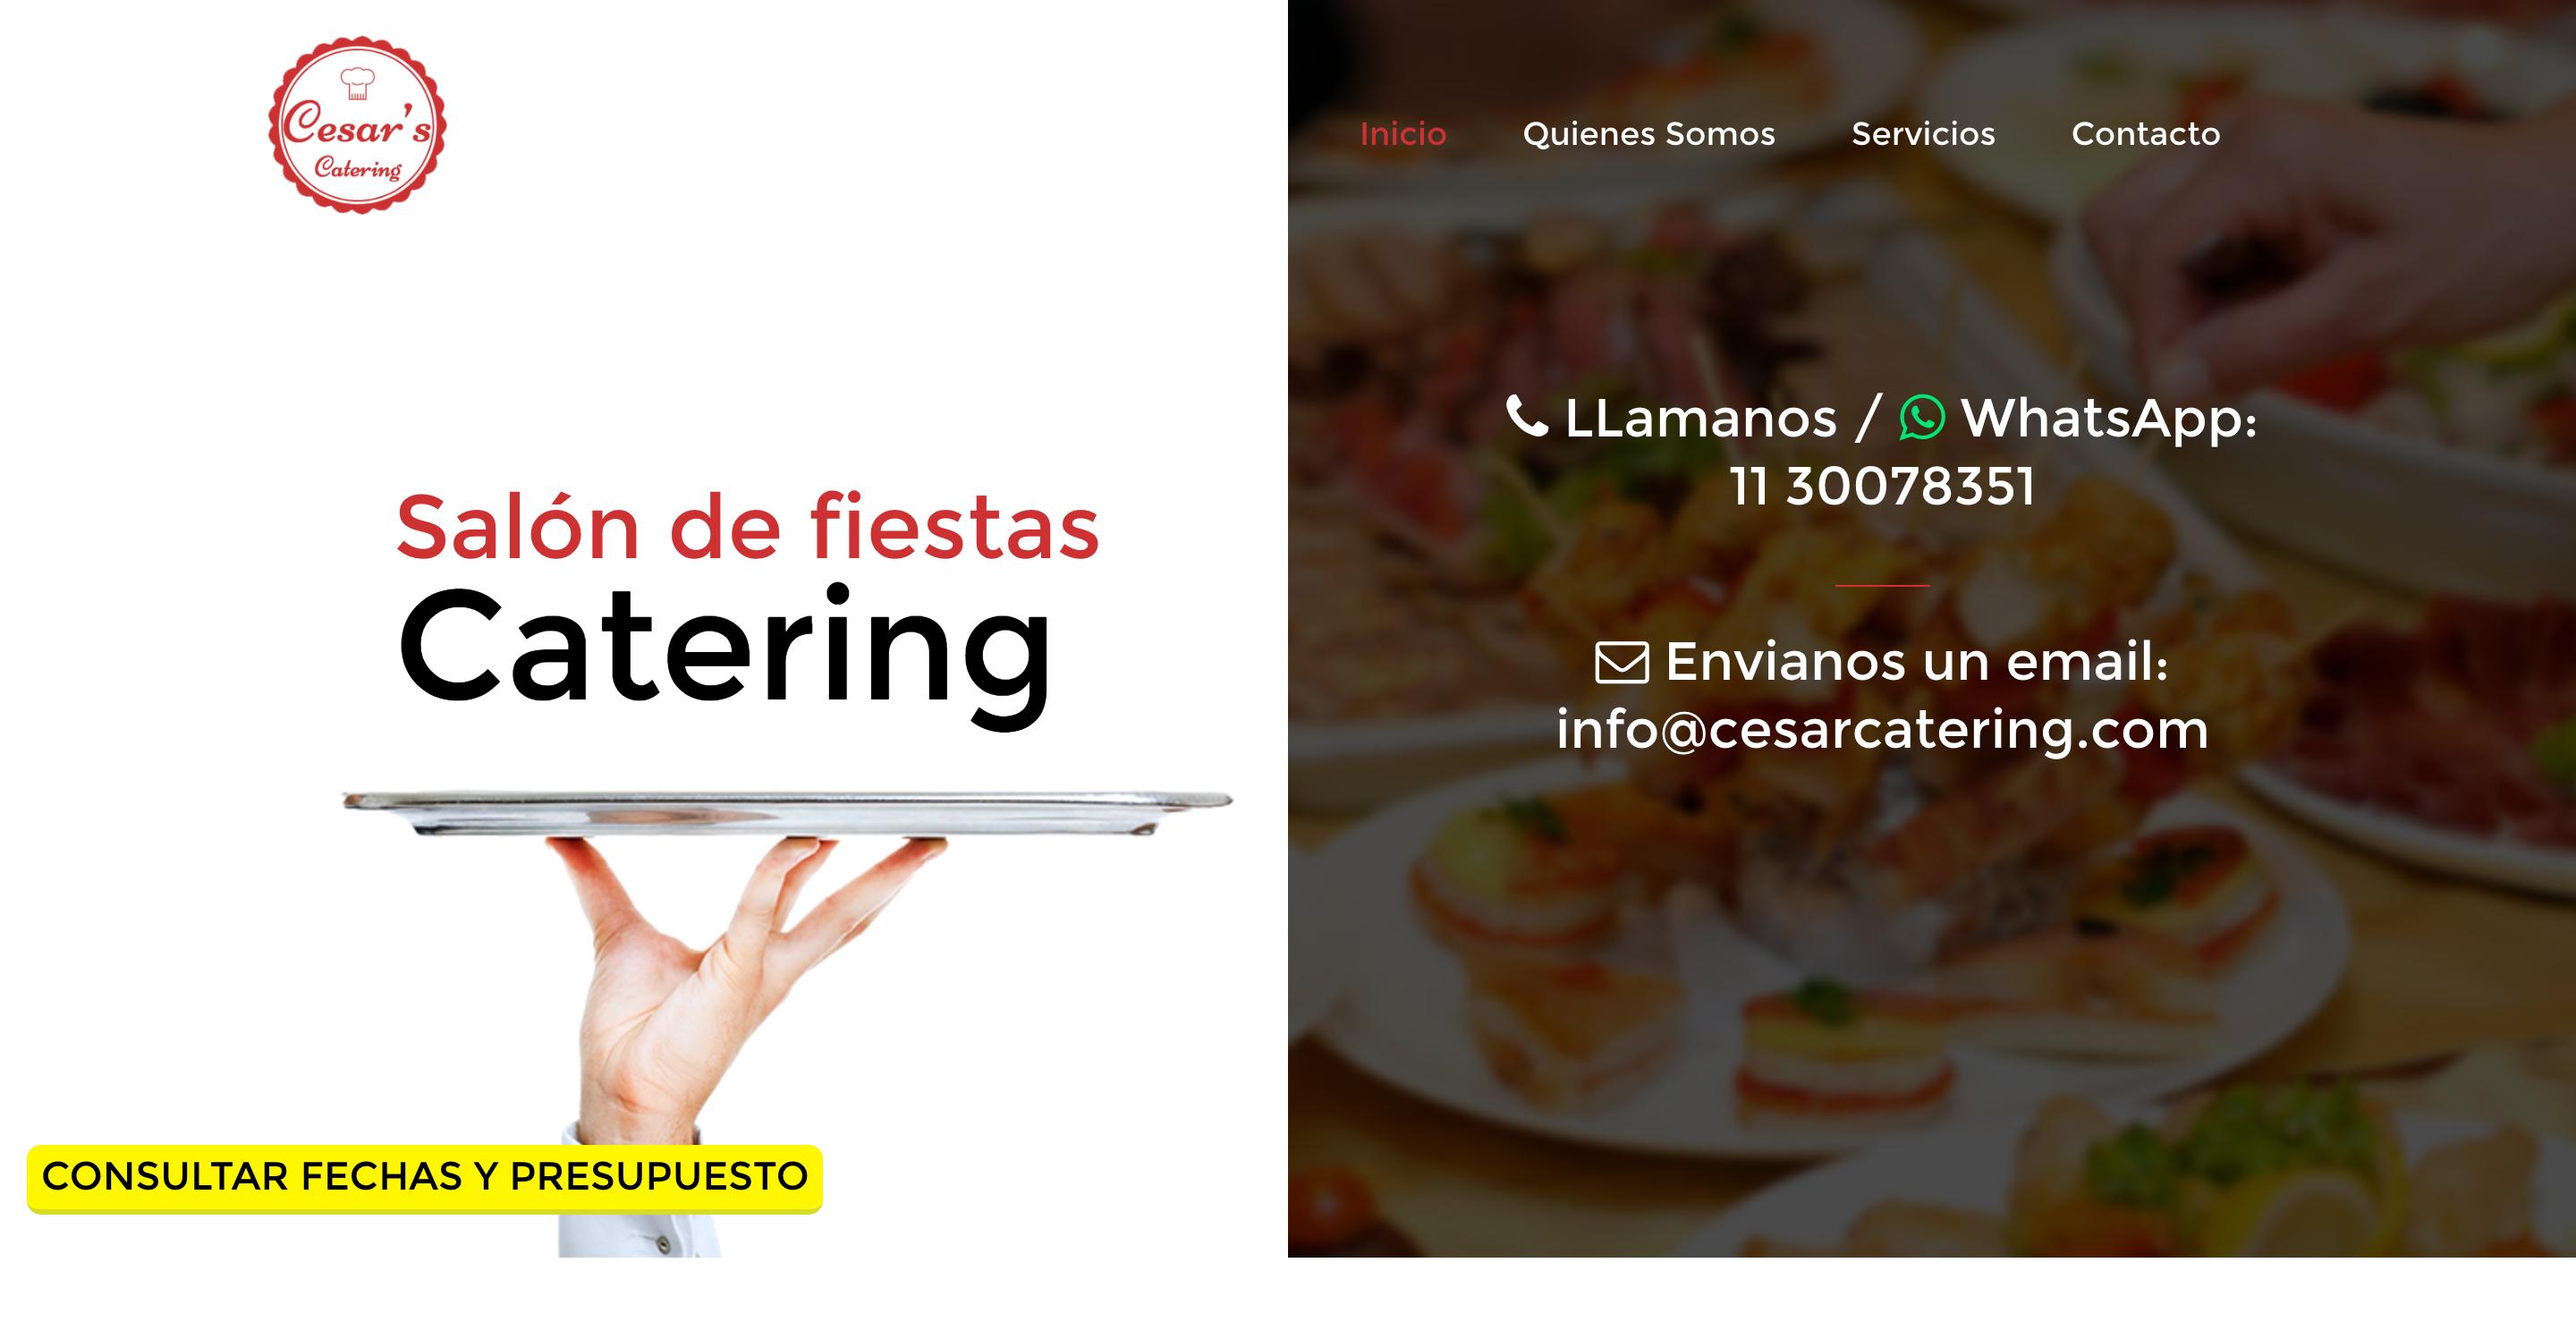 Cesar's Catering